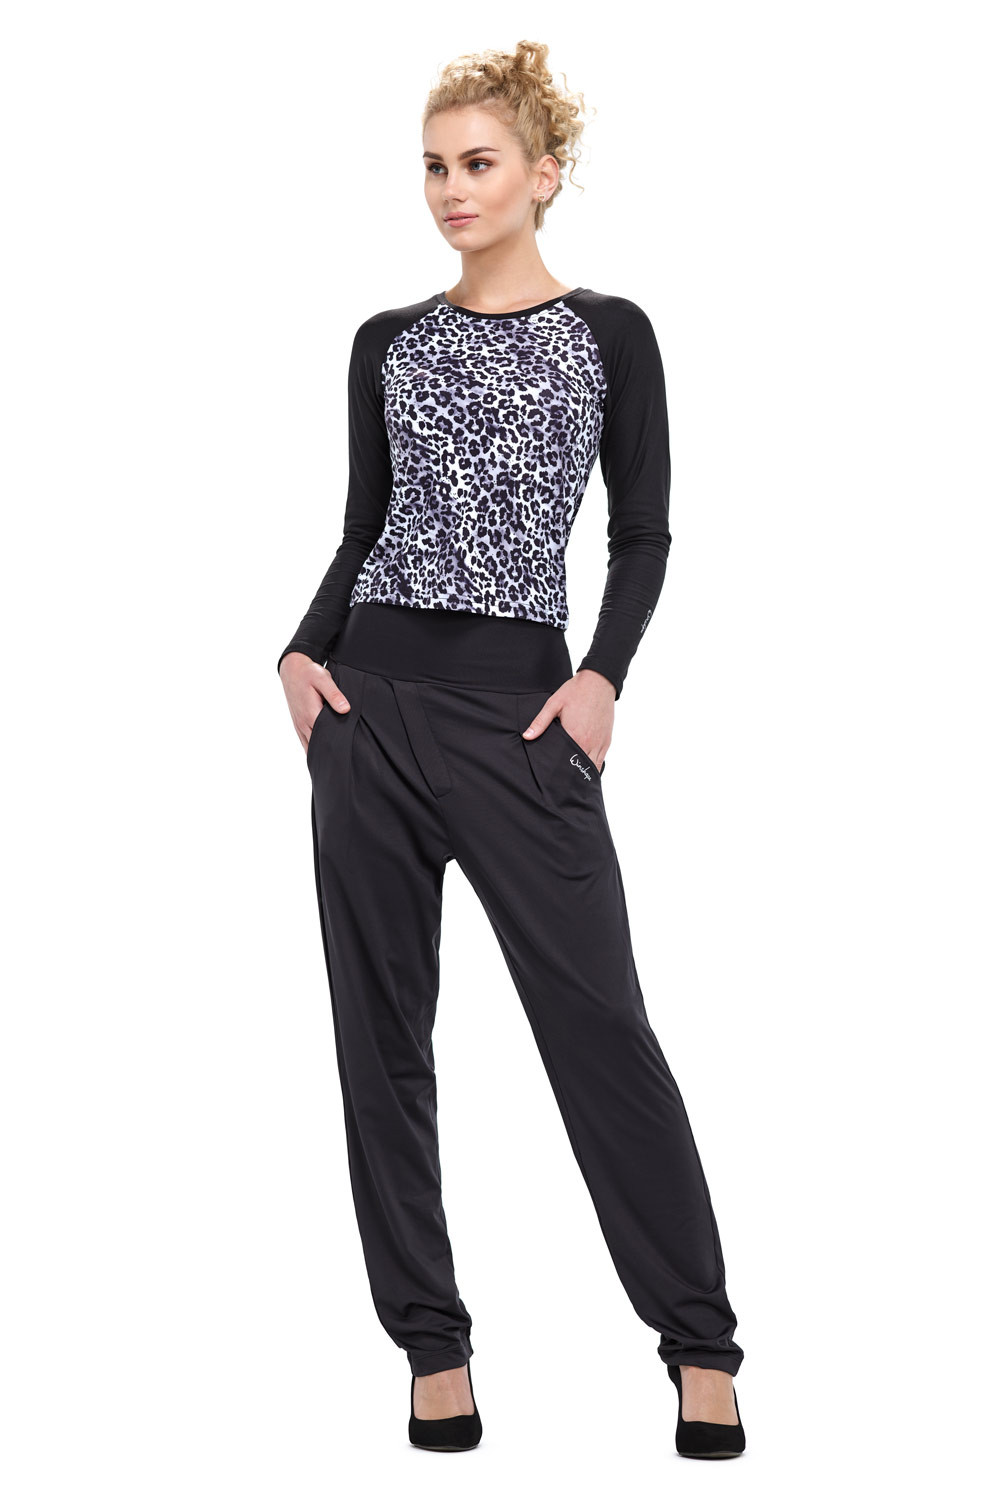 Style Schneeleopard, Sleeve and Cropped Light Soft Ultra AET119LS, Top Long Winshape Soft Functional